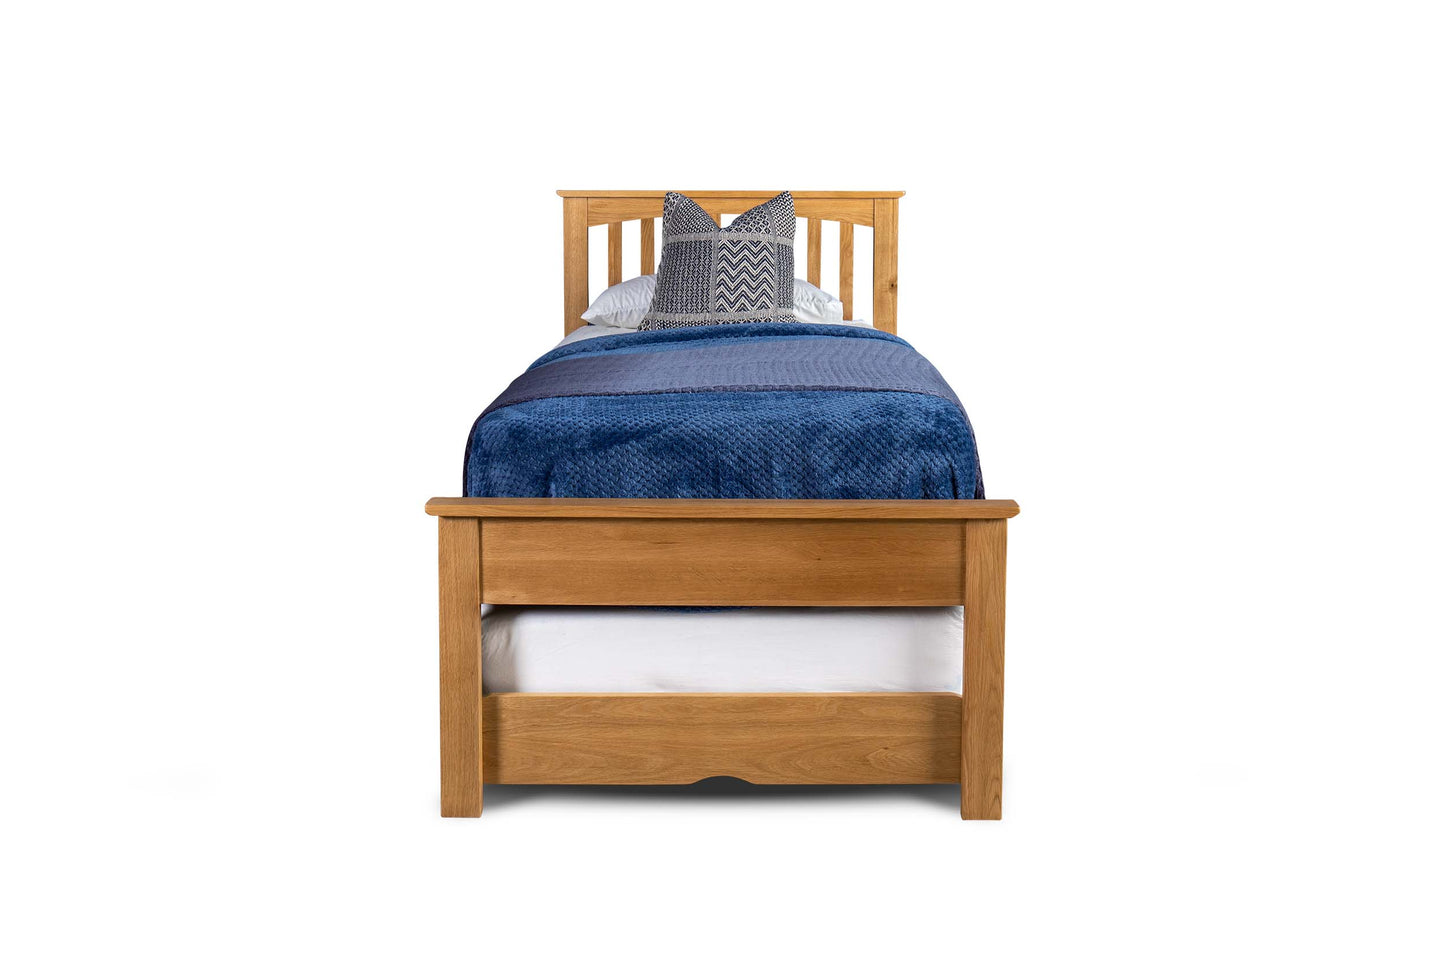 Hythe Guest Bed - Low Foot End - 3ft Single - Natural Oak